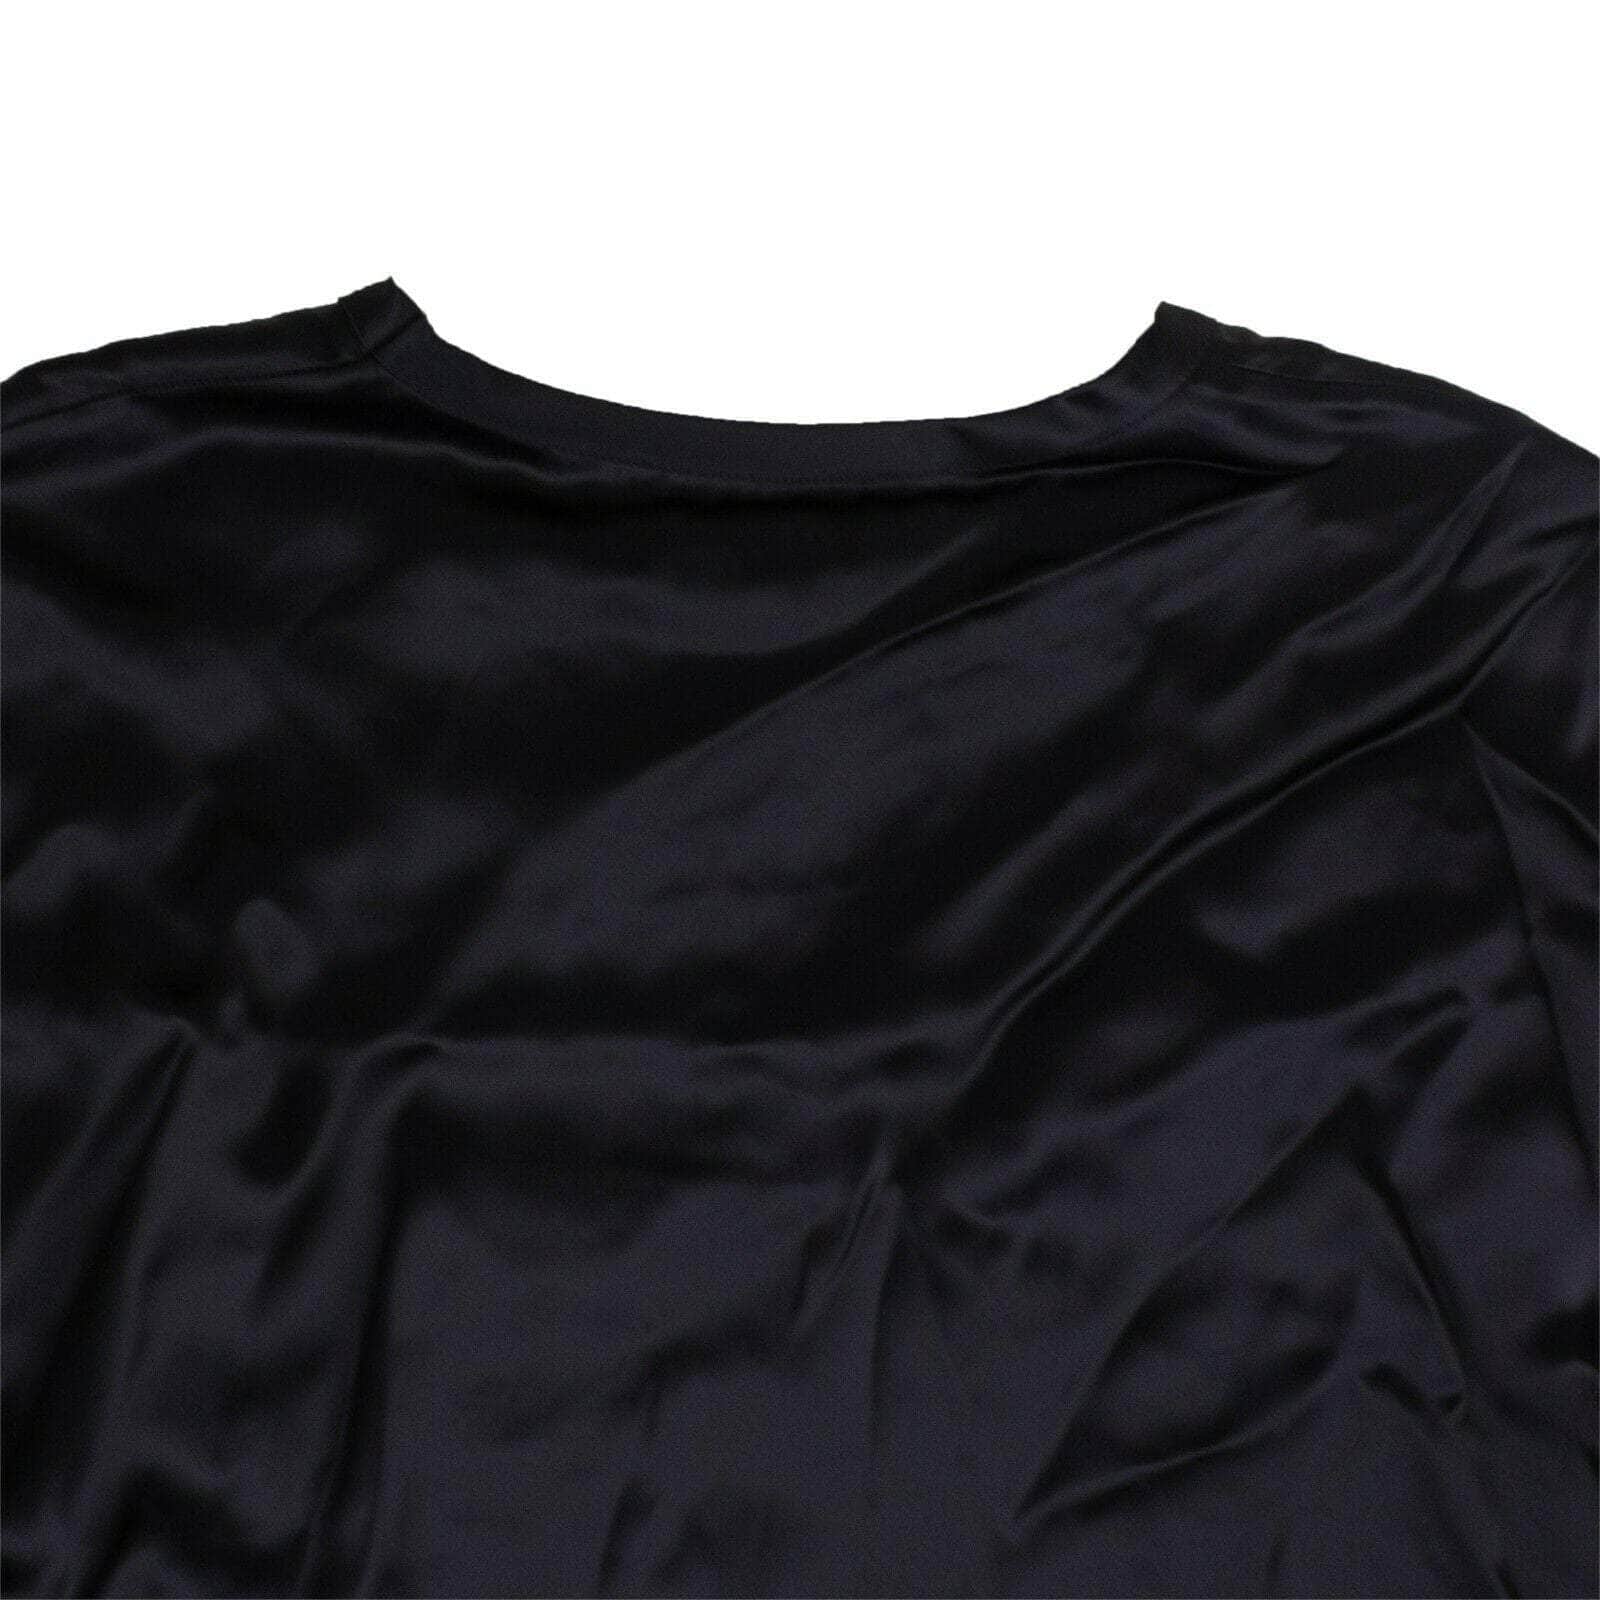 A_Plan_Application a_plan_application, channelenable-all, chicmi, couponcollection, gender-womens, main-clothing, size-s, under-250, womens-day-dresses S Navy Satin T-Shirt Dress 74NGG-AP-6/S 74NGG-AP-6/S